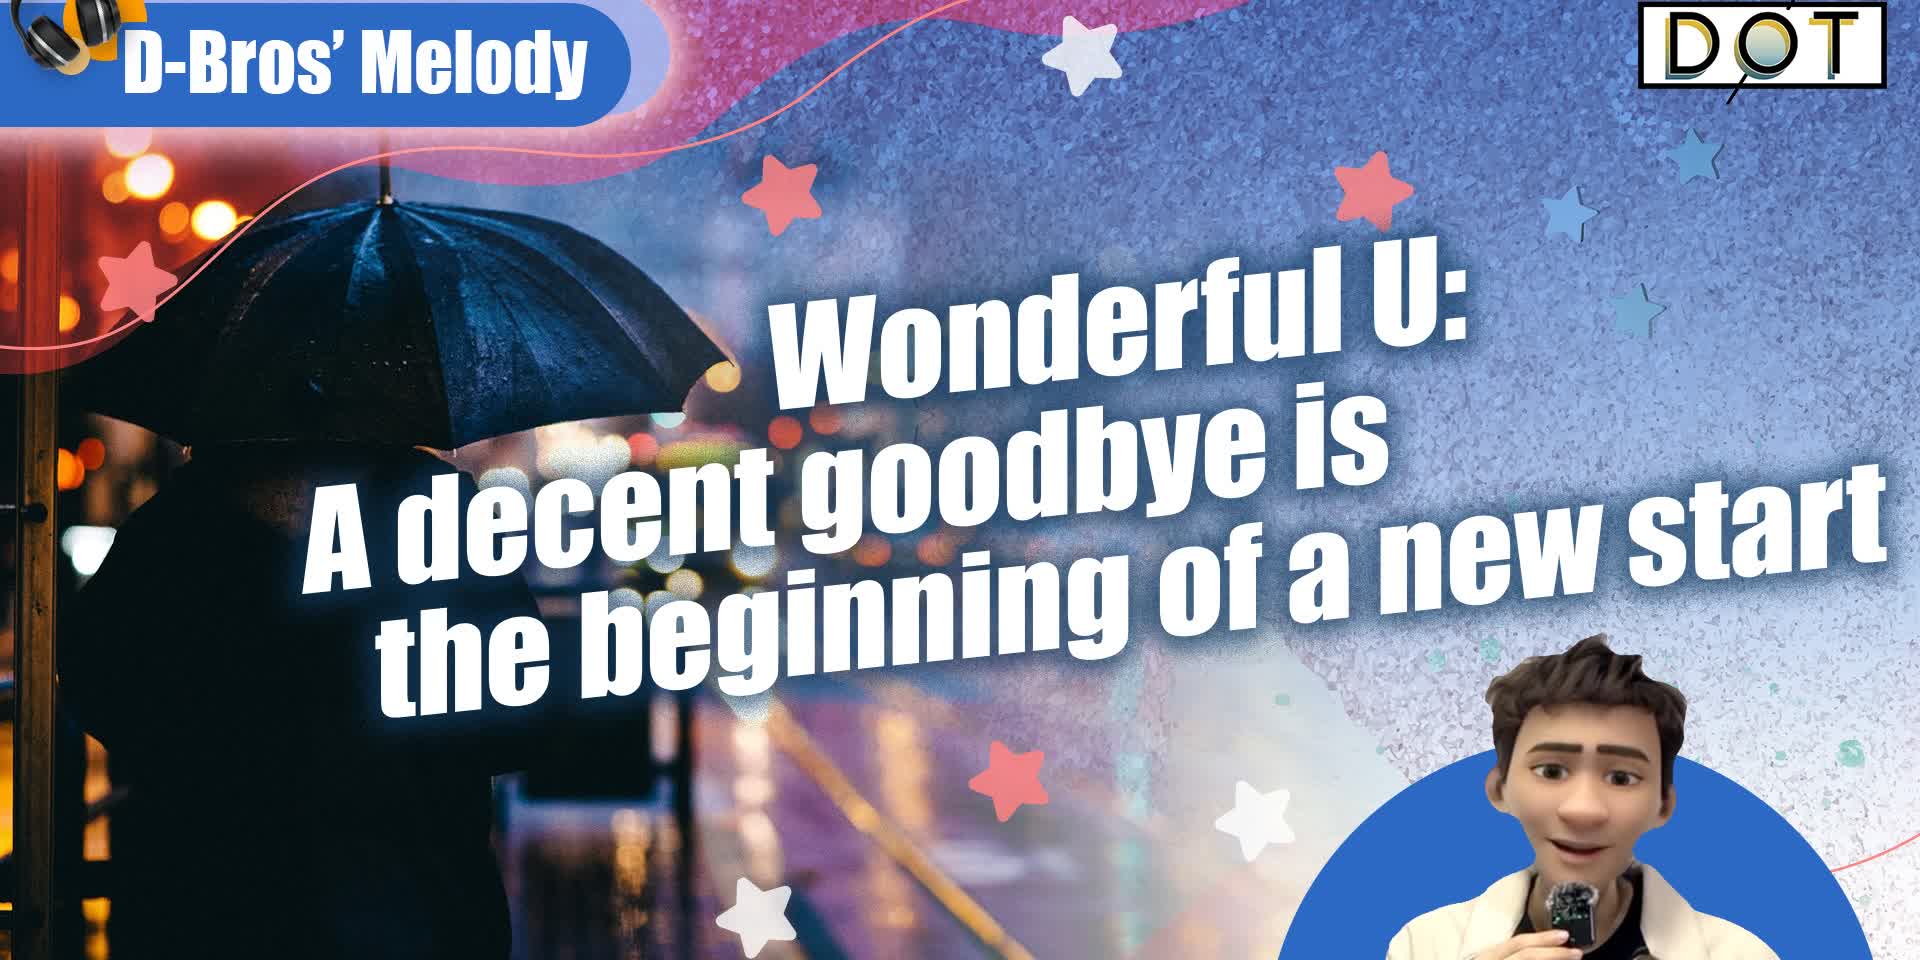 D-Bros' Melodies | Wonderful U: A decent goodbye is the beginning of a new start